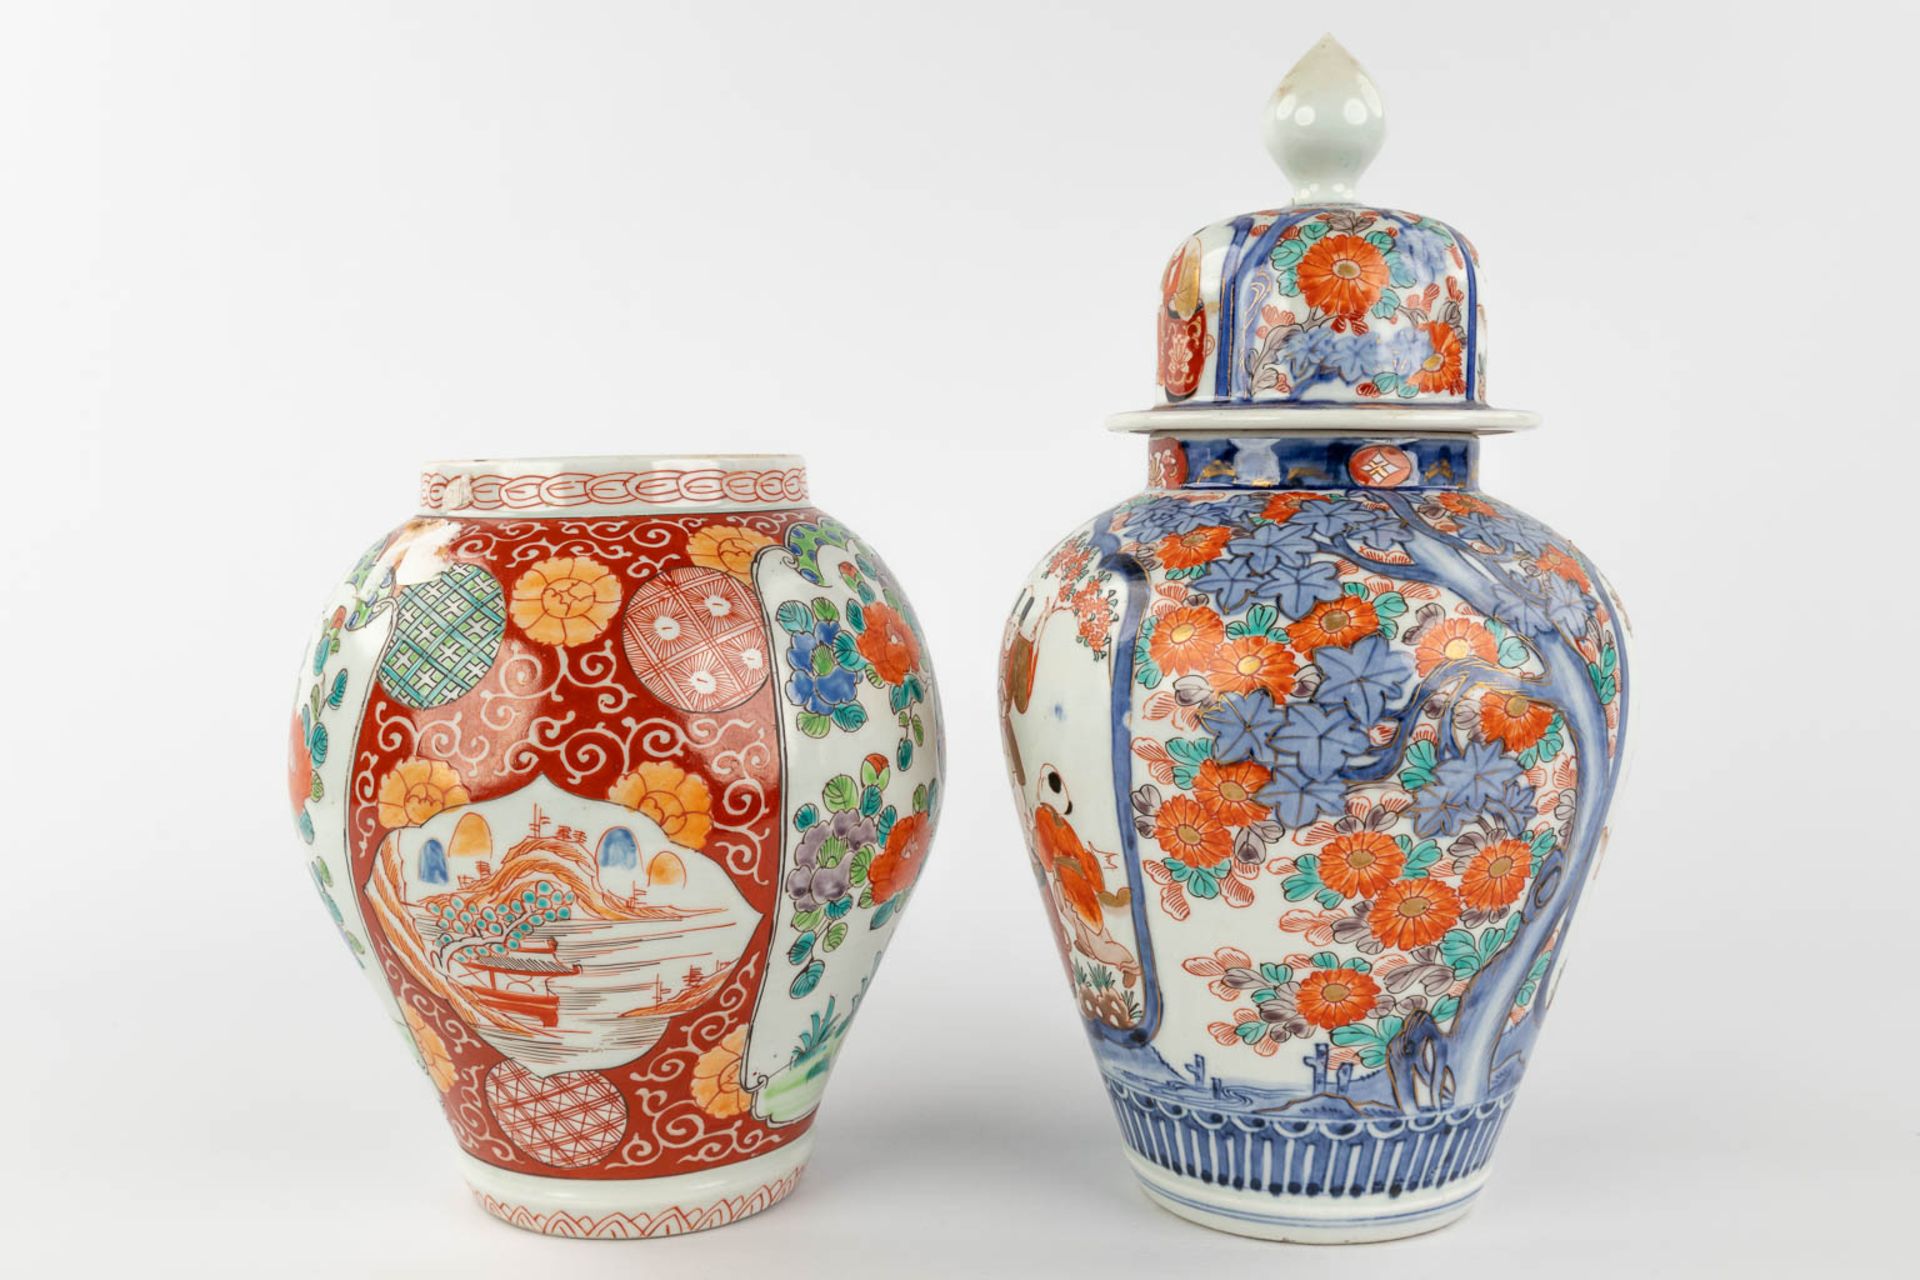 An assembled collection of Japanese Imari and Kutani porcelain. 19th/20th century. (H: 35 x D: 19 cm - Image 11 of 22